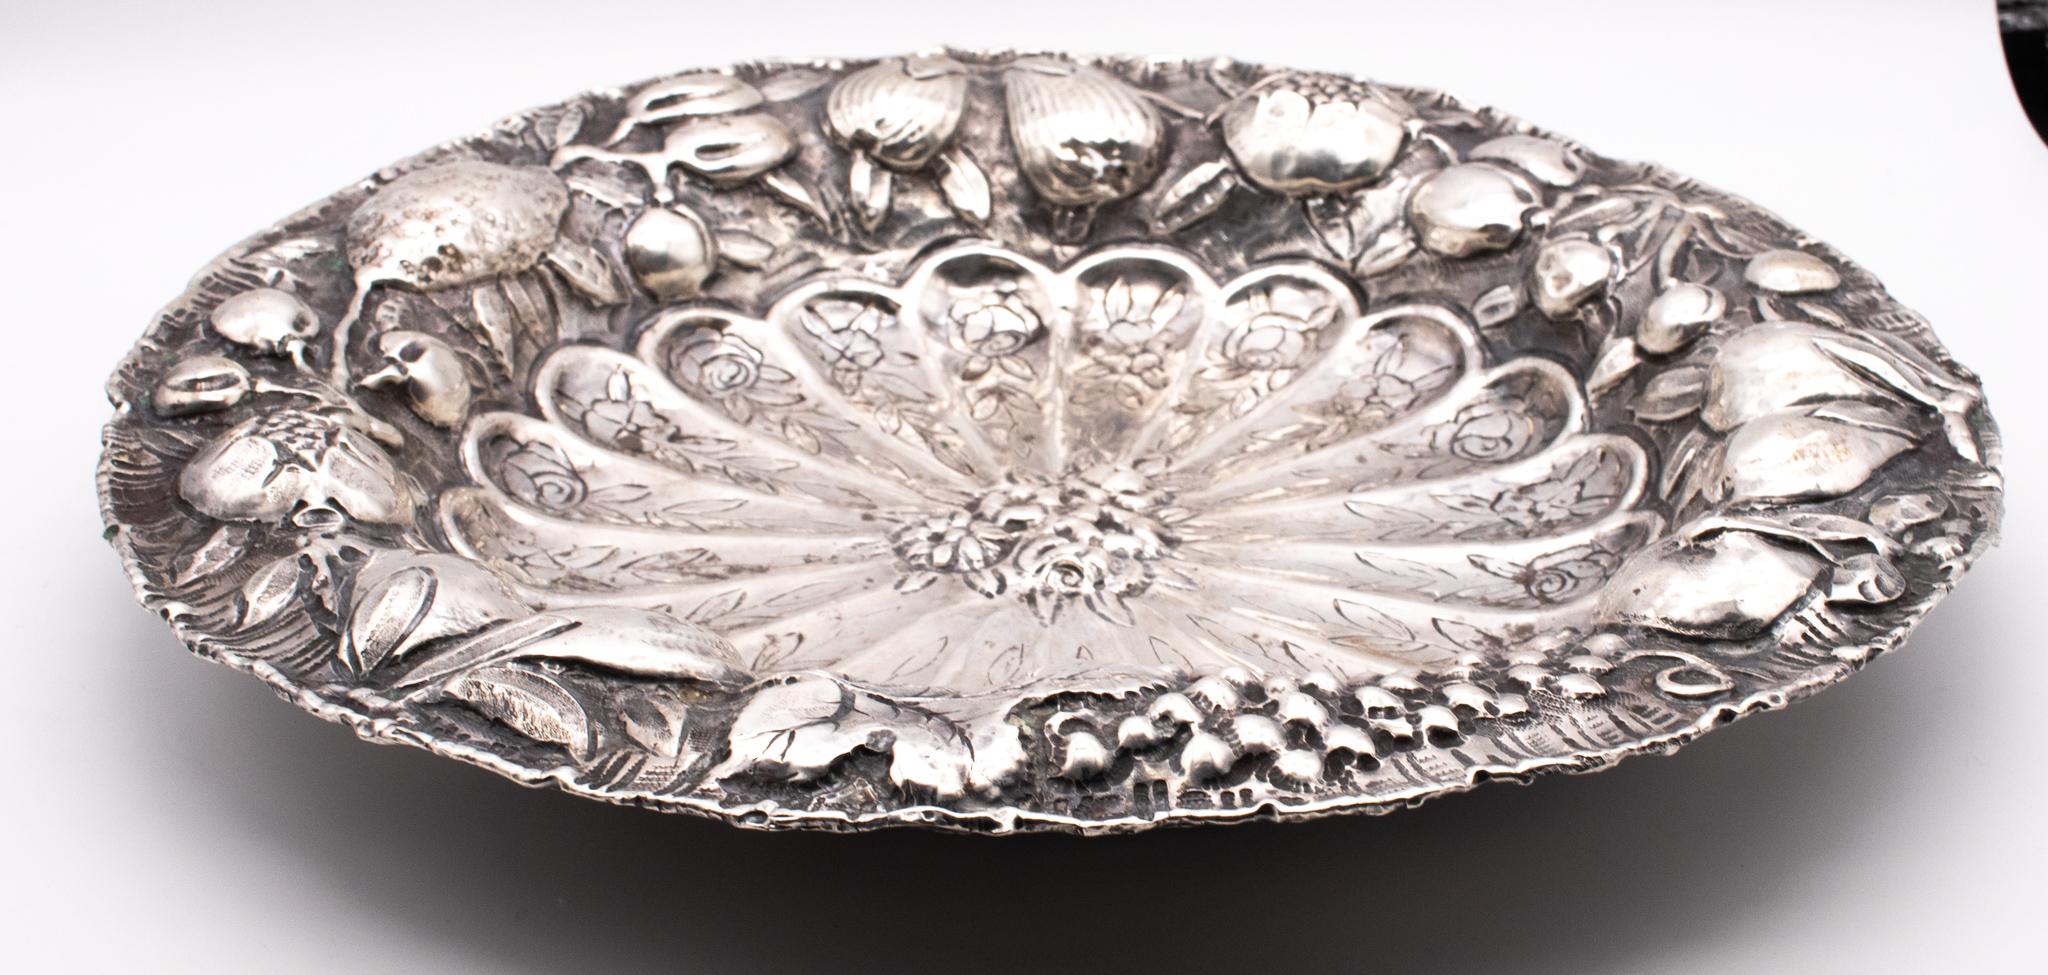 Italy Late 19th Century Renaissance Revival Fruit Plate Tray In .800 Silver For Sale 1